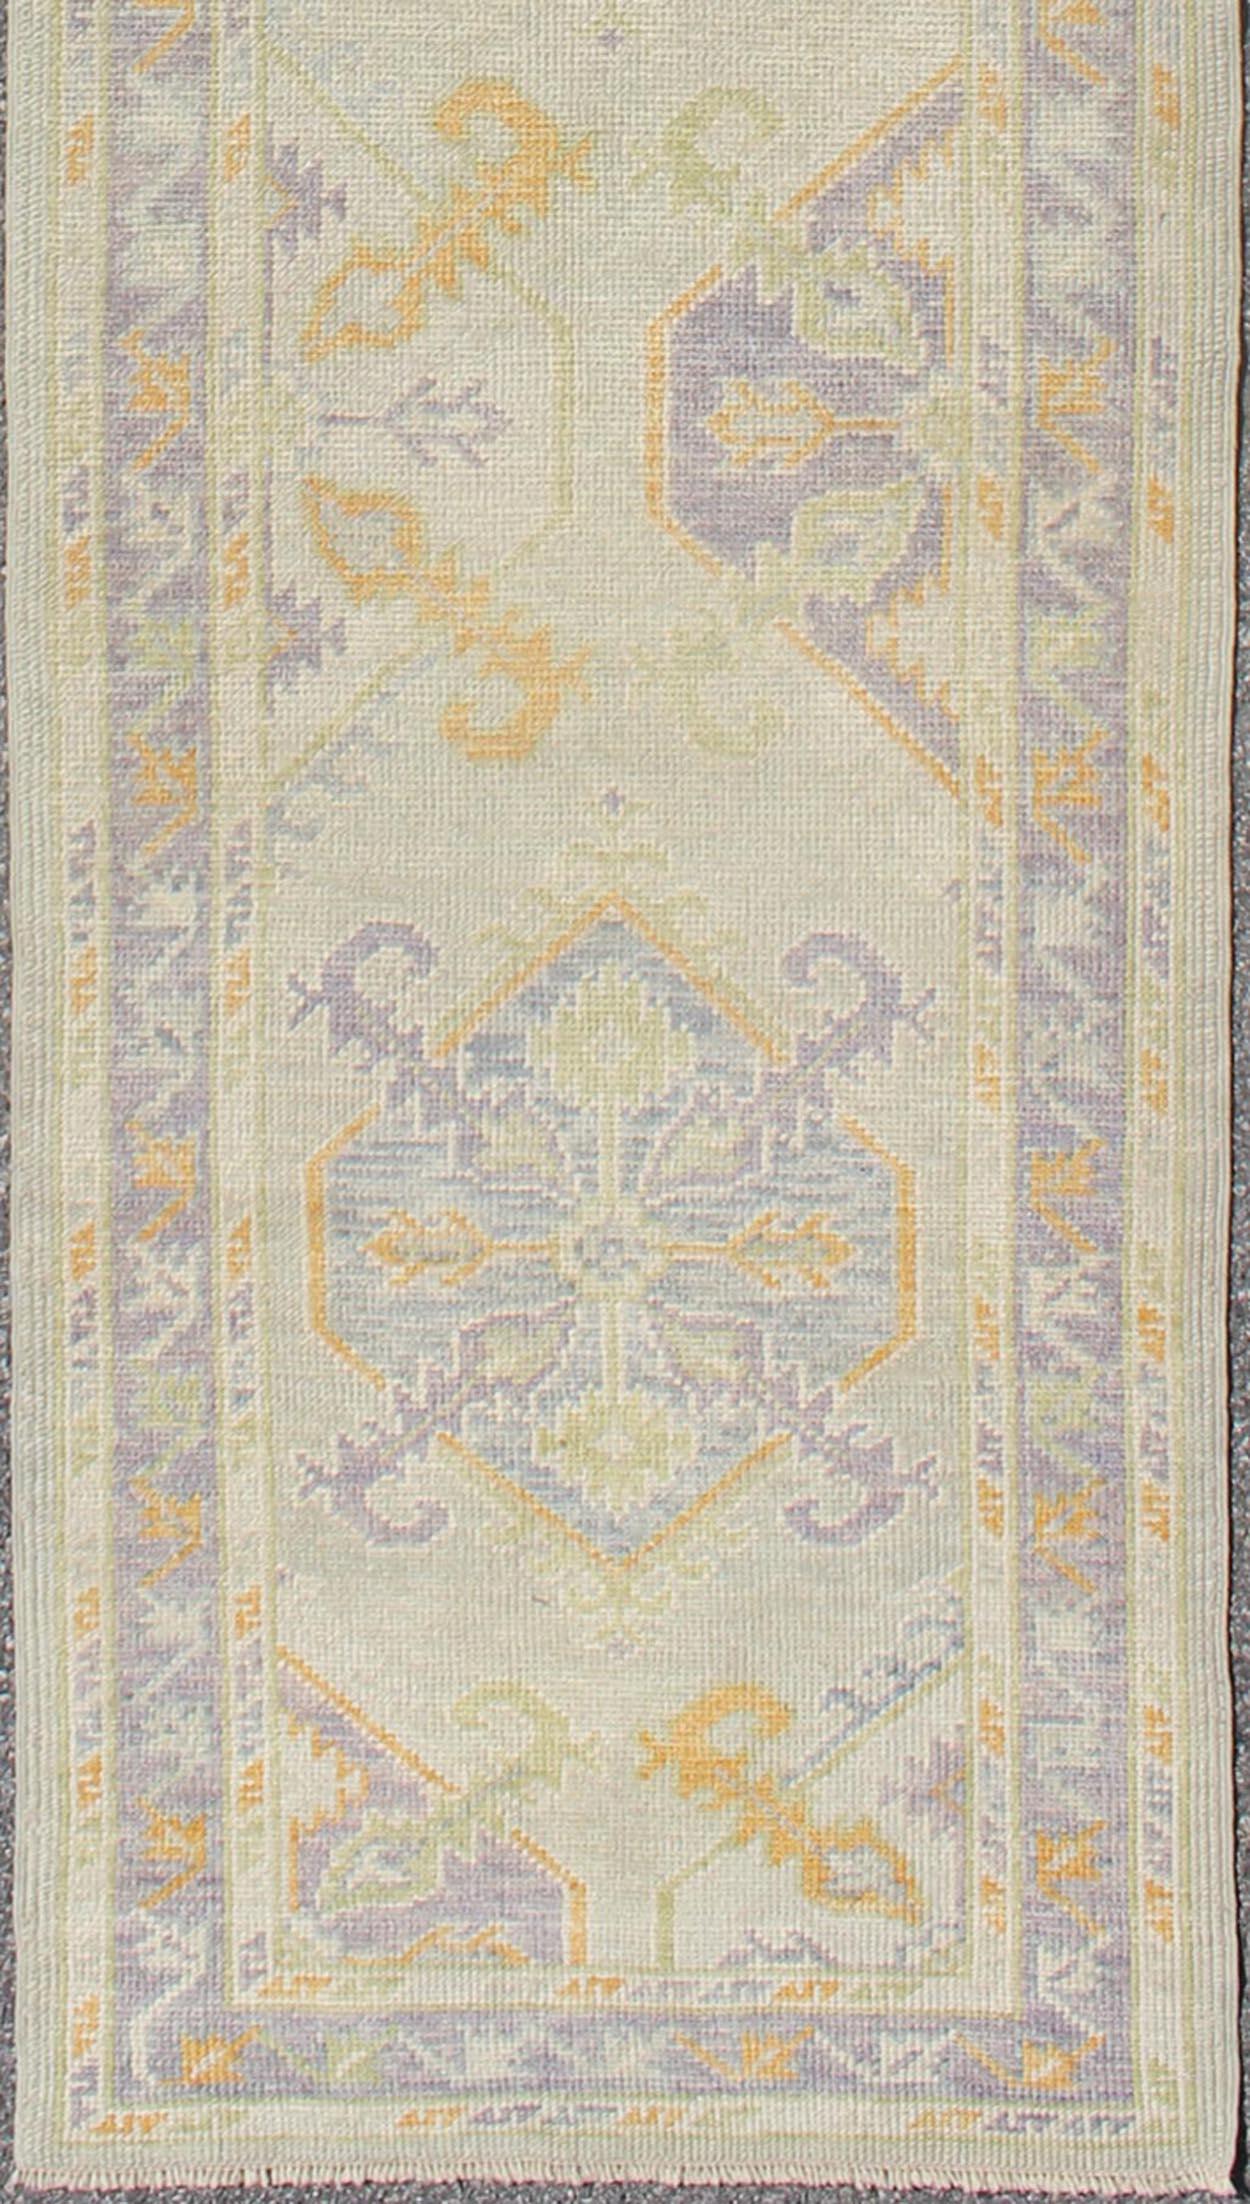 Turkish Oushak runner with purple, blue and L.Green colors and all-over Tribal design. Keivan Woven Arts / rug EN-165660, country of origin / type: Turkey / Oushak
Measures: 2'8 x 12'9.
This traditional Oushak runner from Turkey features a subdued,